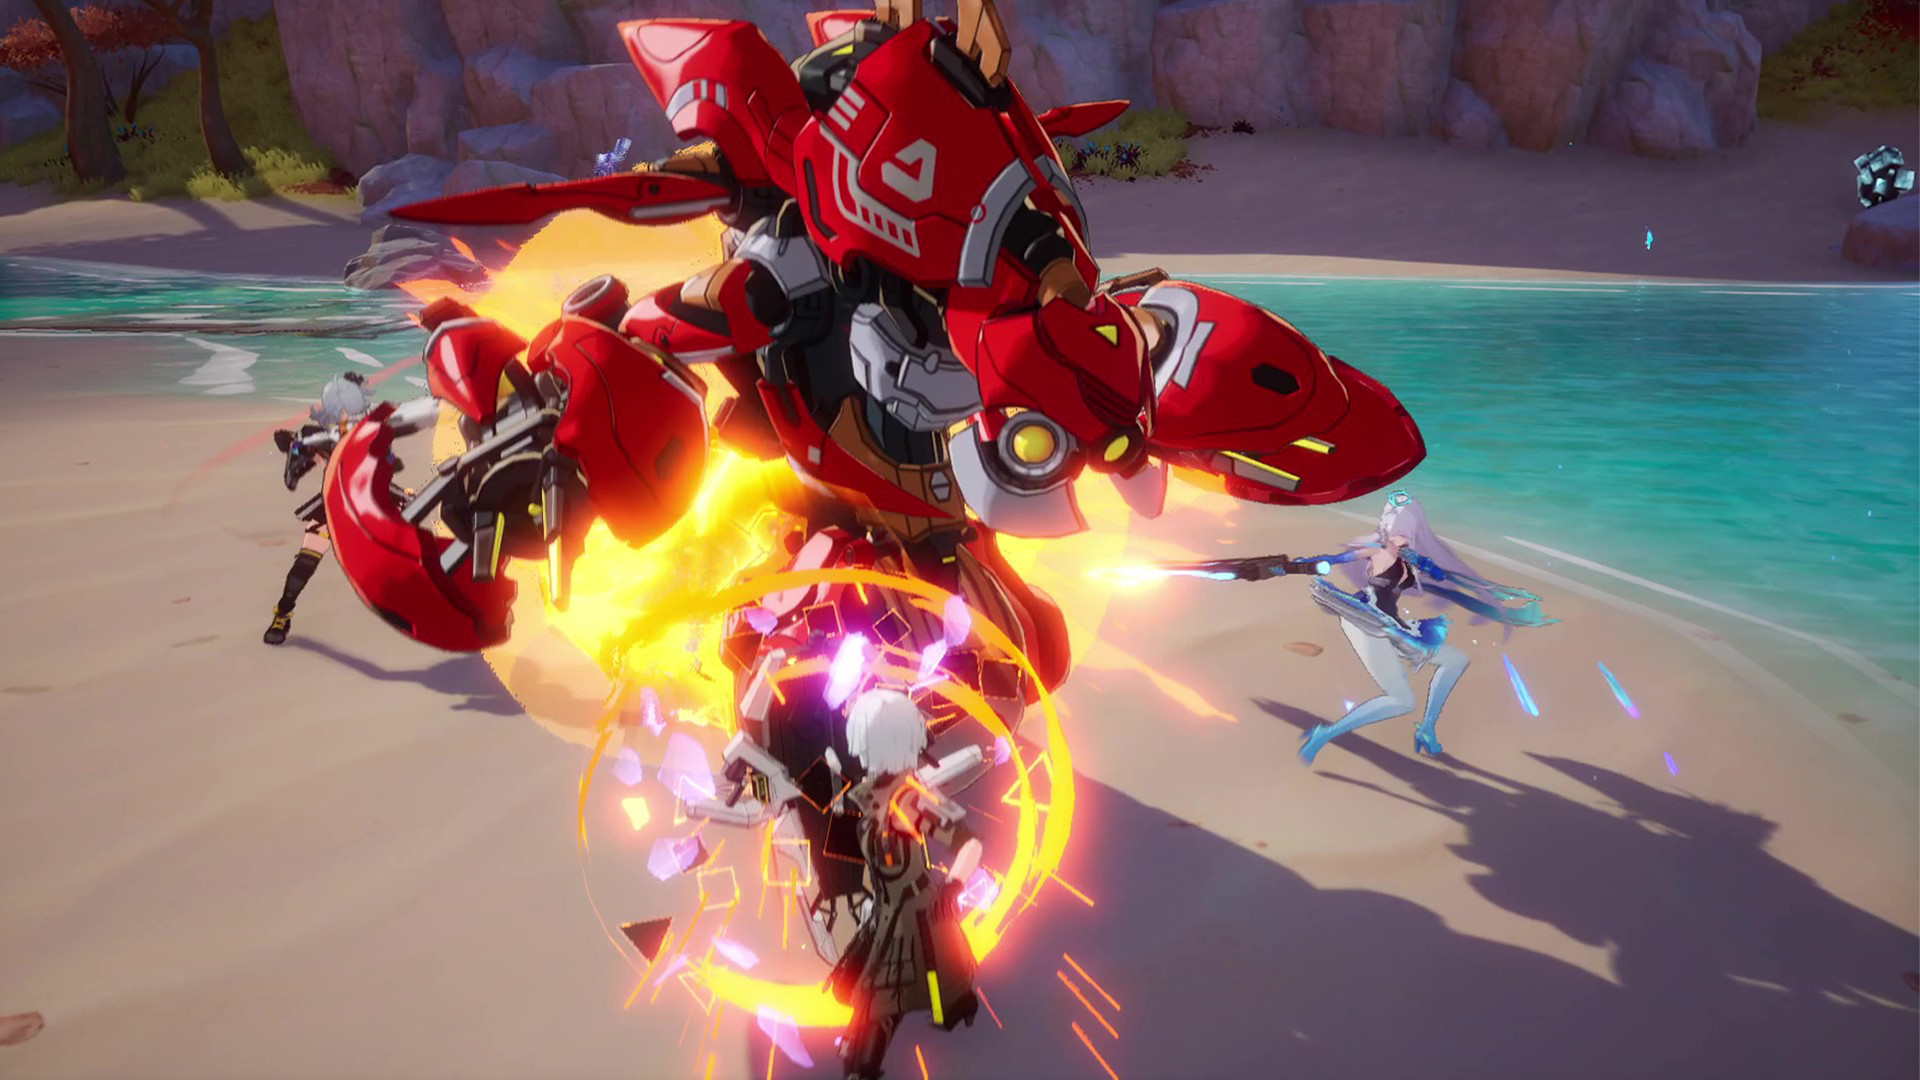 Players fighting a big red robot.